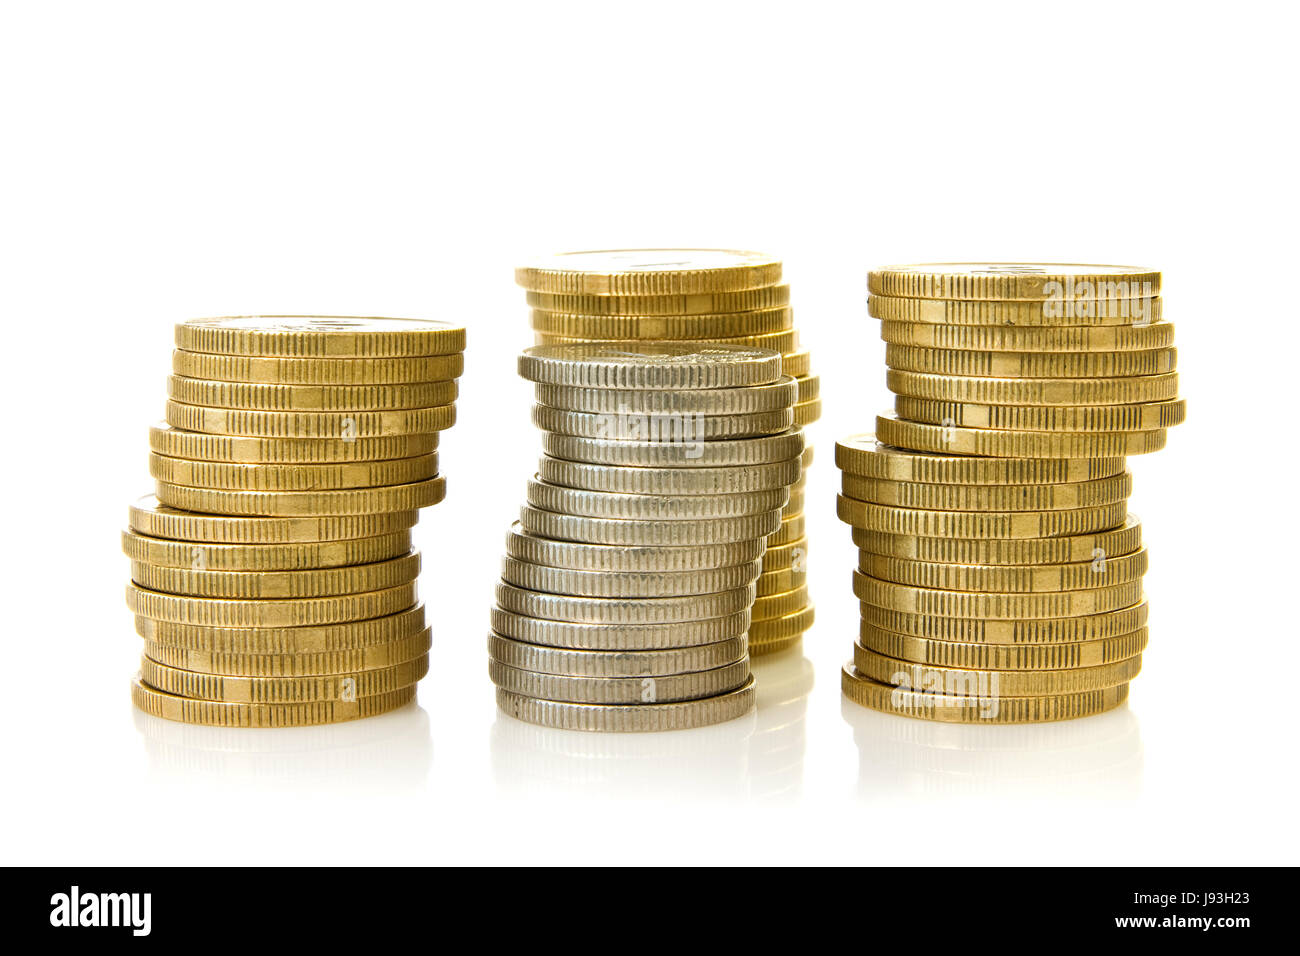 currency, coin, golden, business dealings, deal, business transaction, Stock Photo